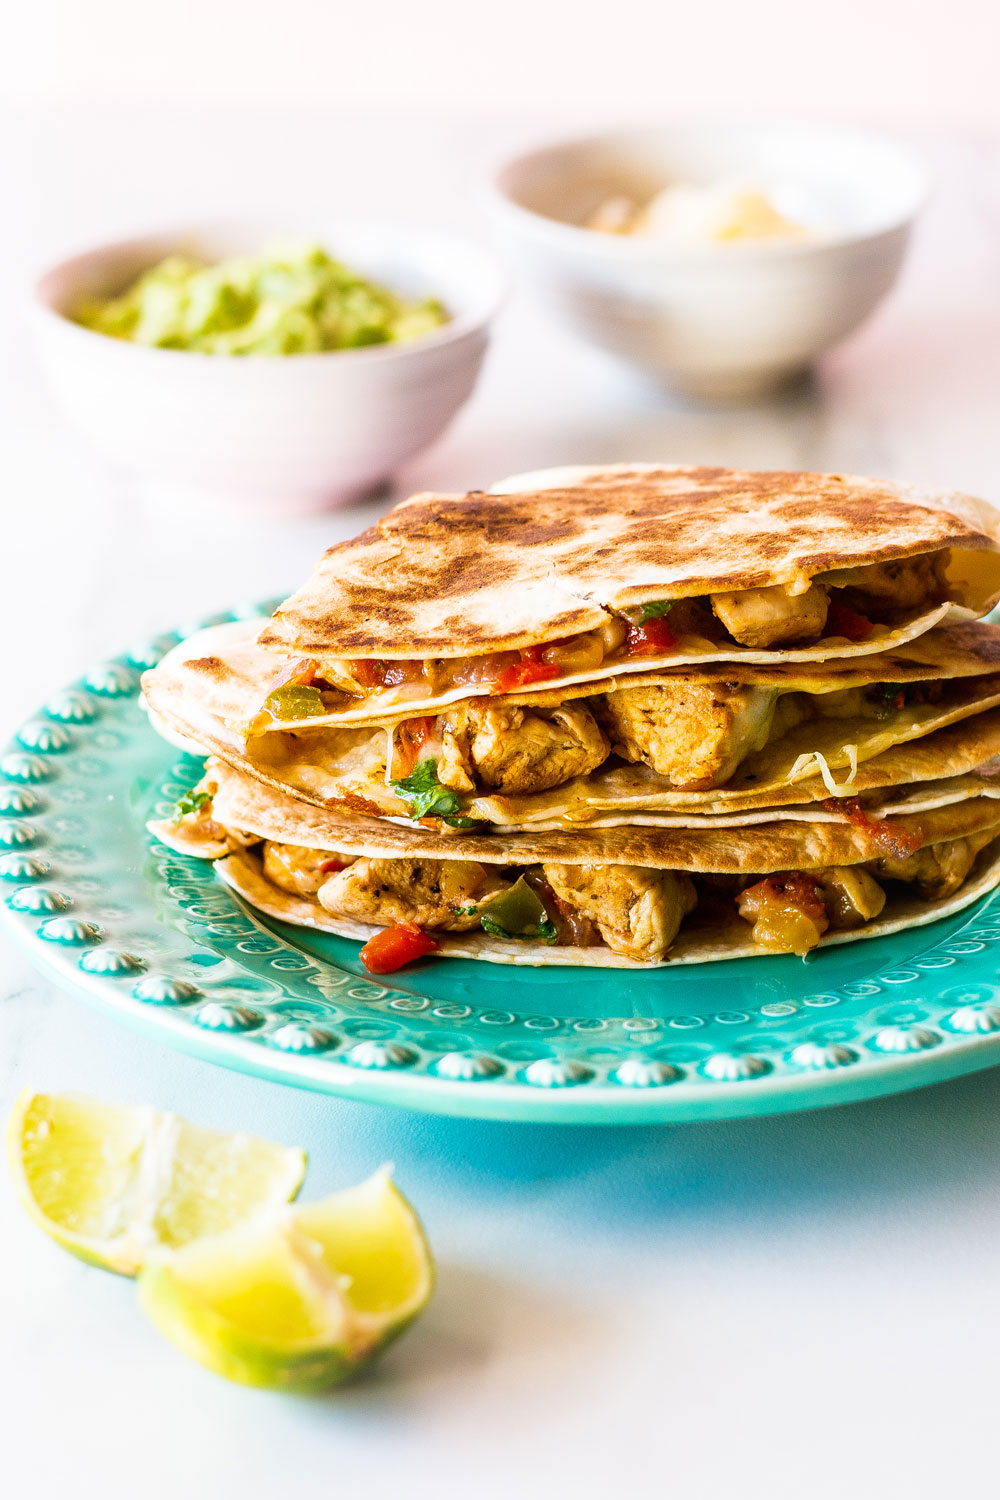 Quesadillas are a crowd favorite, and this easy chicken quesadilla recipe is a quick, filling, delicious meal that you can make for lunch, dinner, or breakfast in under 30 minutes. https://www.spotebi.com/recipes/easy-chicken-quesadilla-recipe/